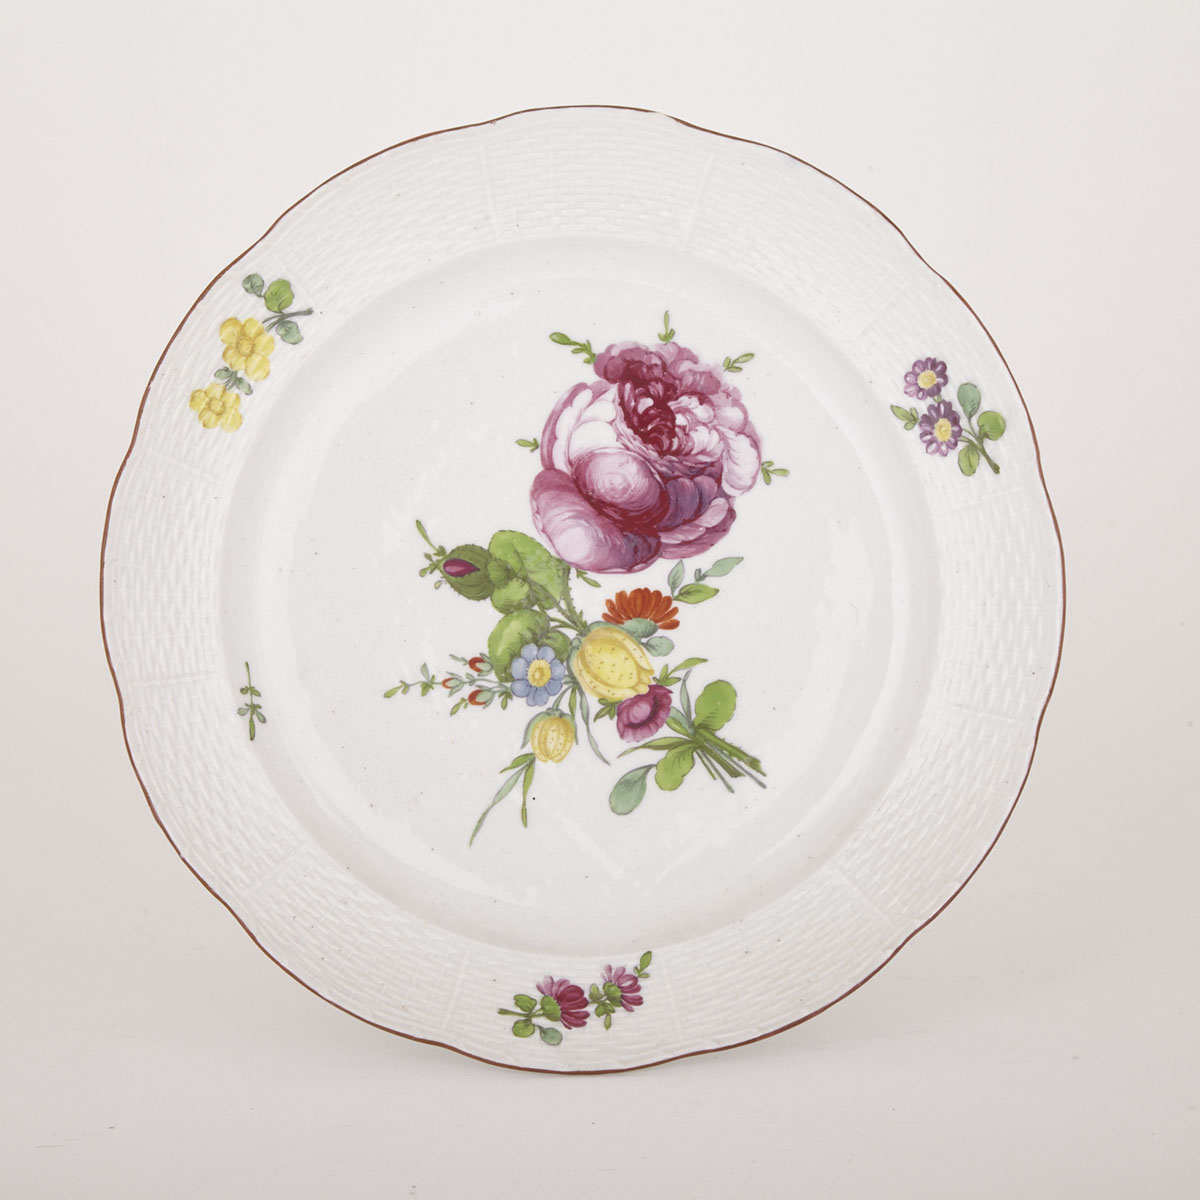 Russian Imperial Porcelain Plate, period of Catherine II, late 18th century